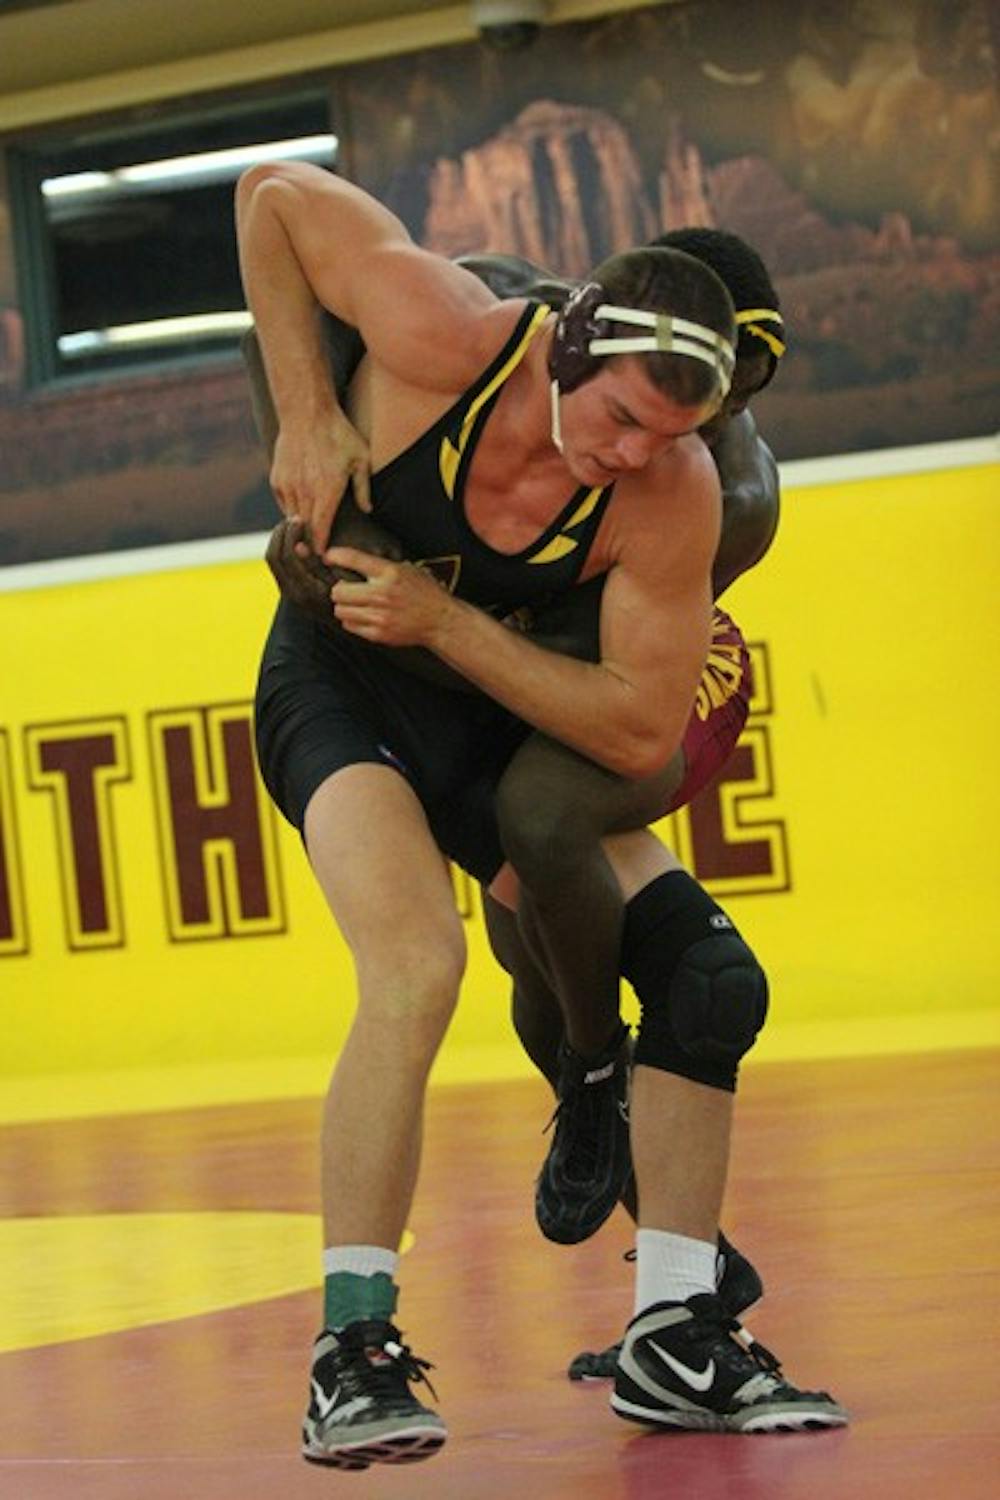 Redshirt senior Jake Meredith grapples with teammate and redshirt sophomore Kevin Radford in ASU’s annual Maroon vs. Gold match on Oct. 26. (Photo by Kyle Newman)